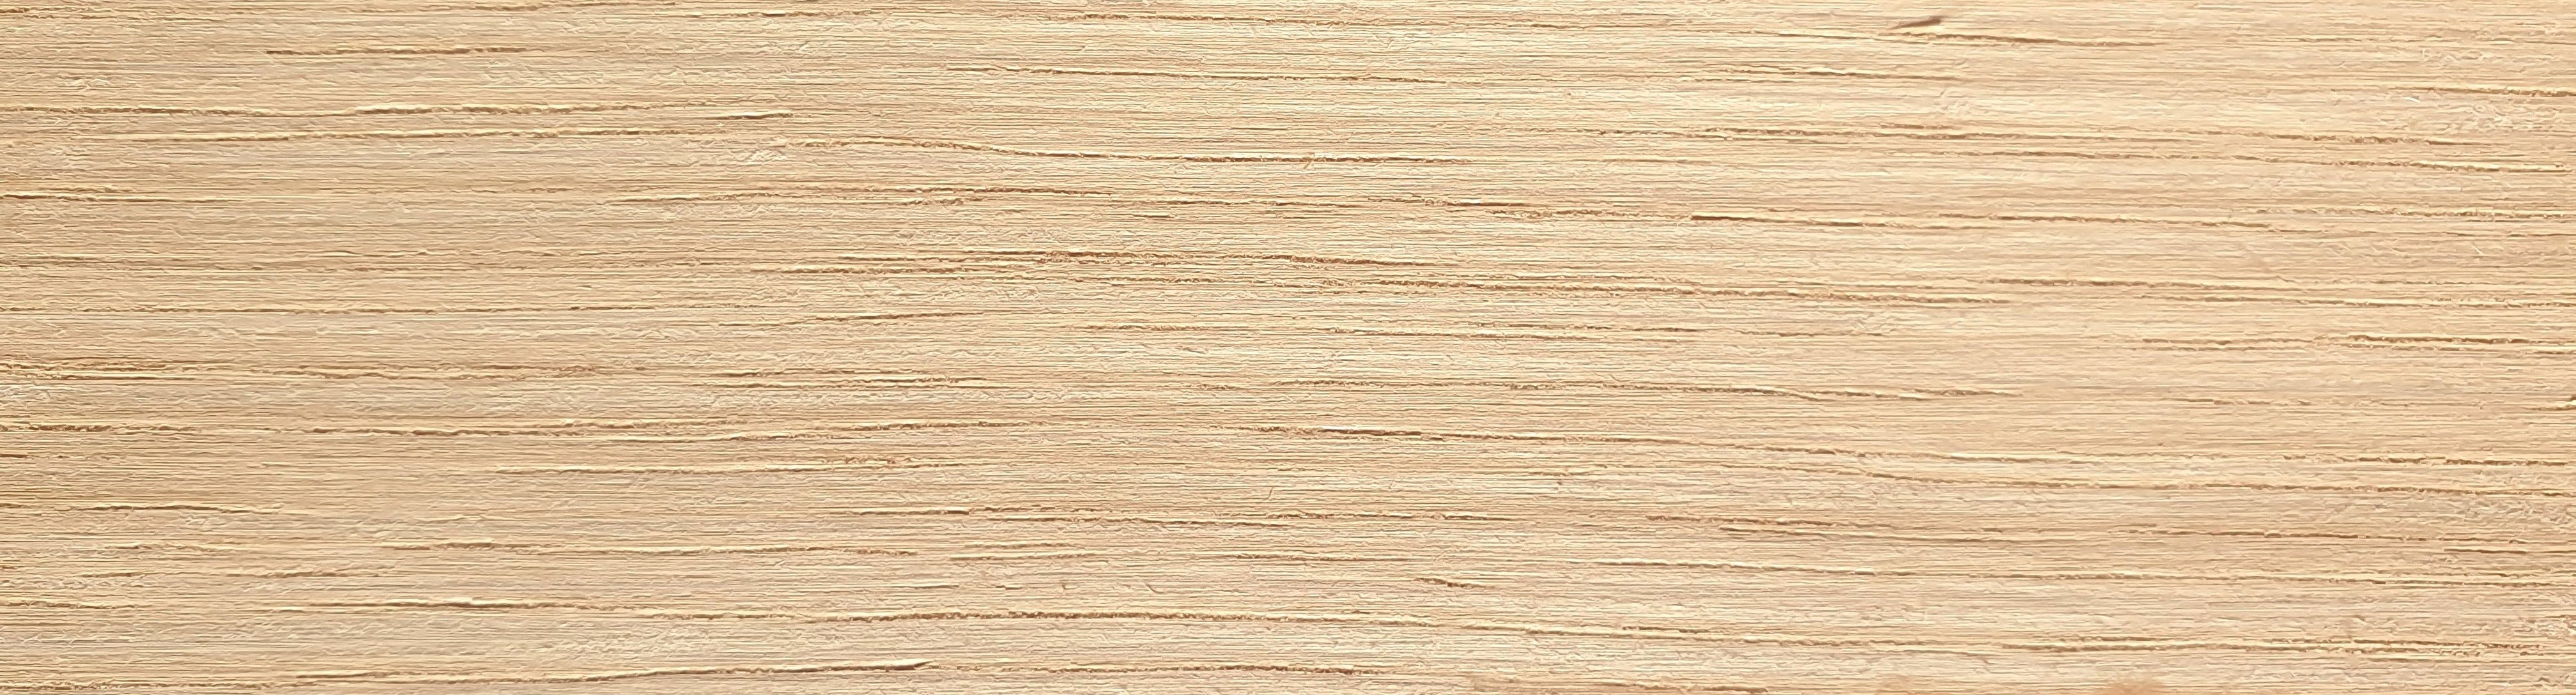 AMERICAN WHITE OAK Pre-glued Iron On Real Wood Edging 50mm Wide